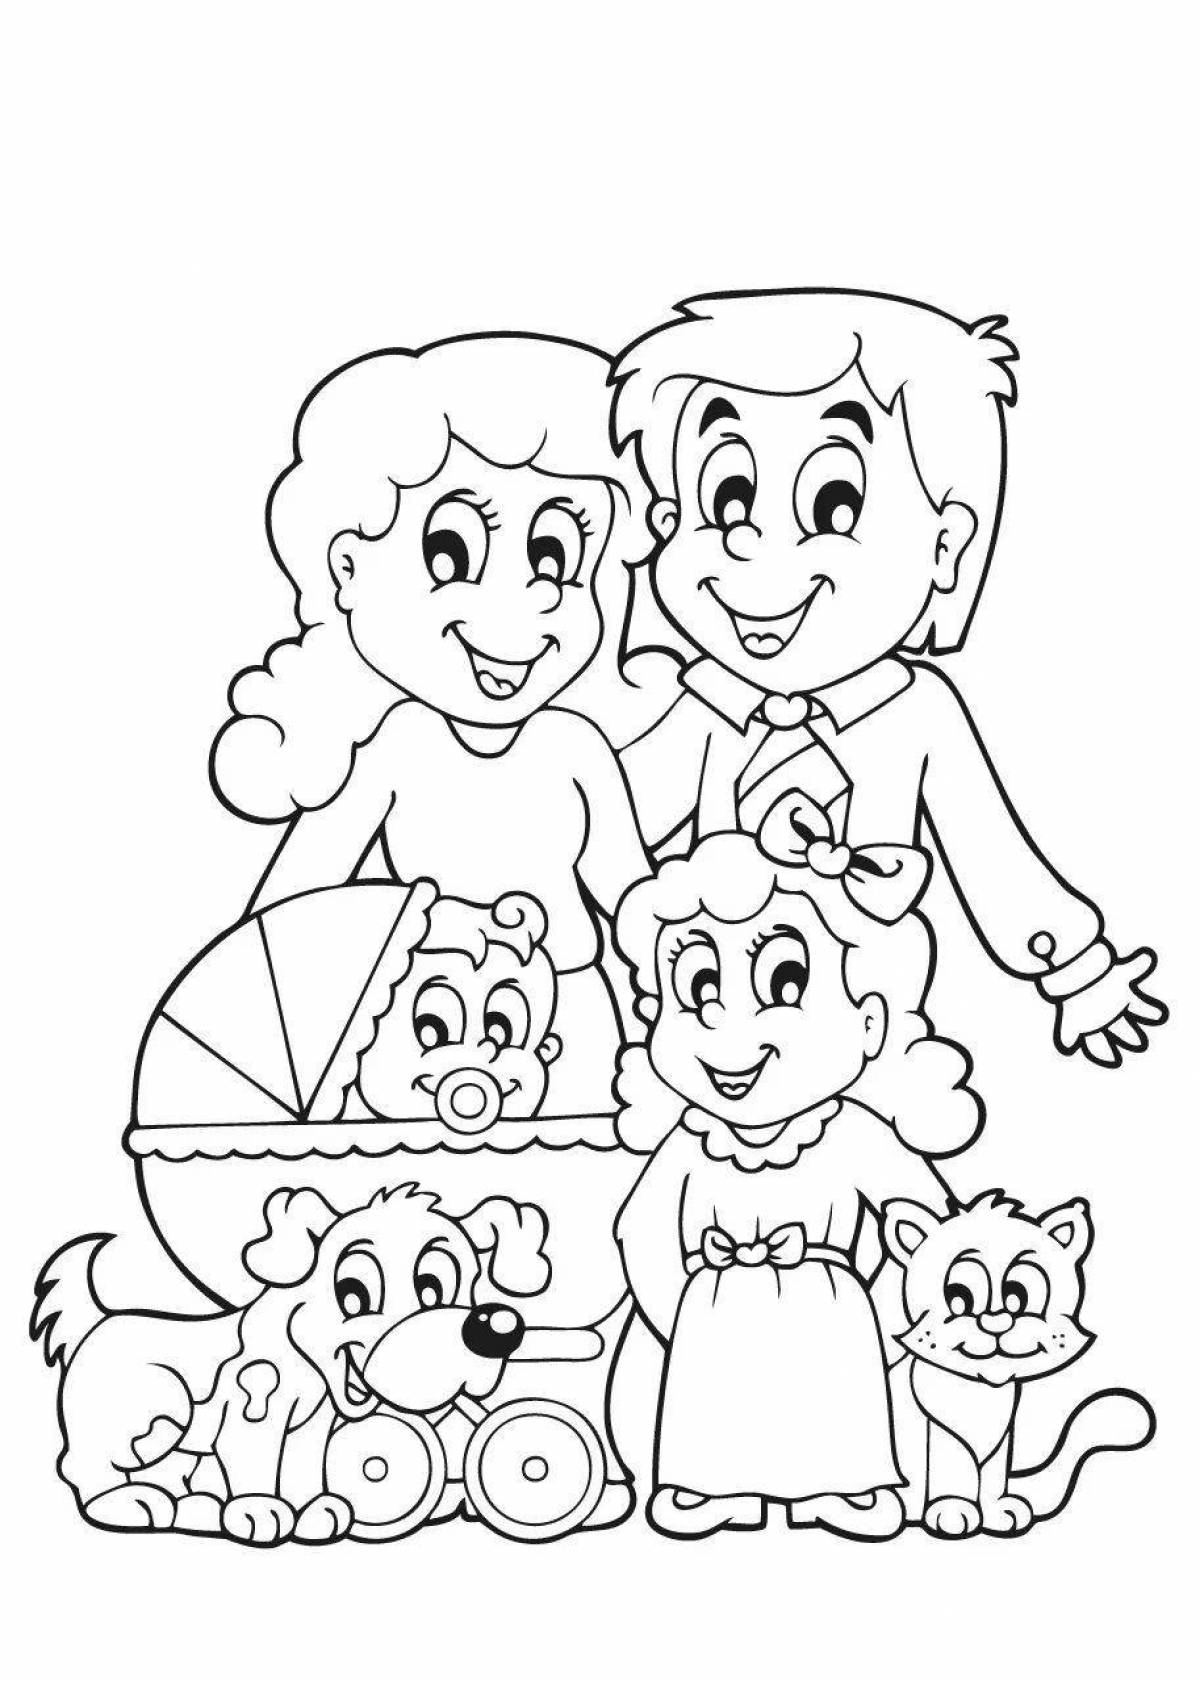 Bright family coloring book